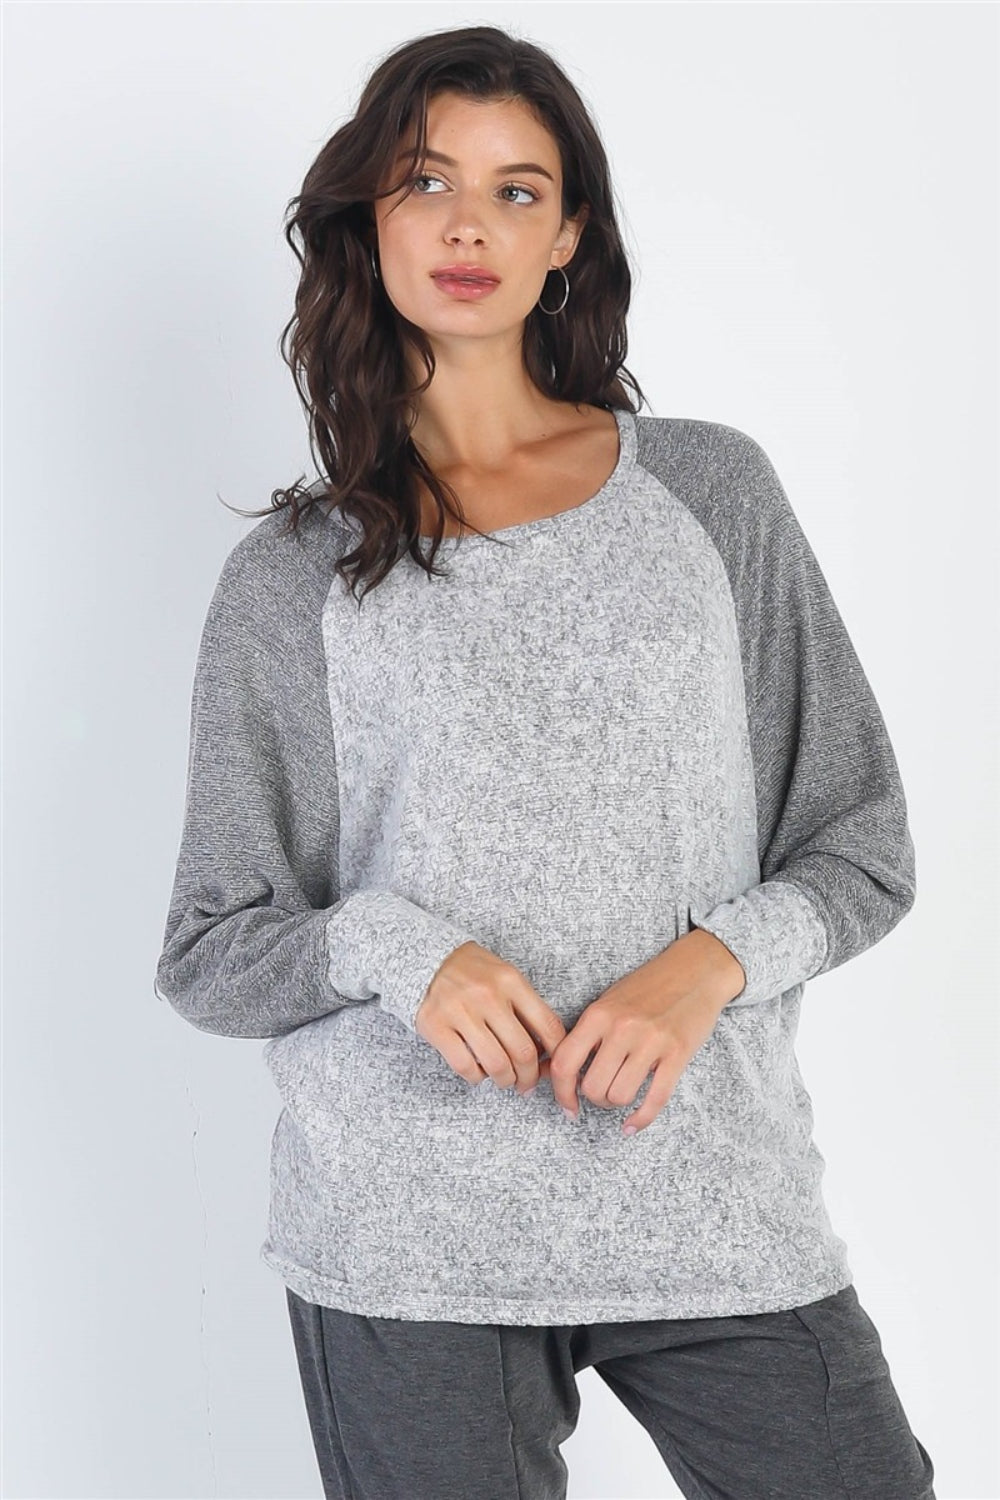 A woman modeling a casual long sleeve contrast top in shades of burgundy and grey, perfect for a stylish yet comfortable outing.